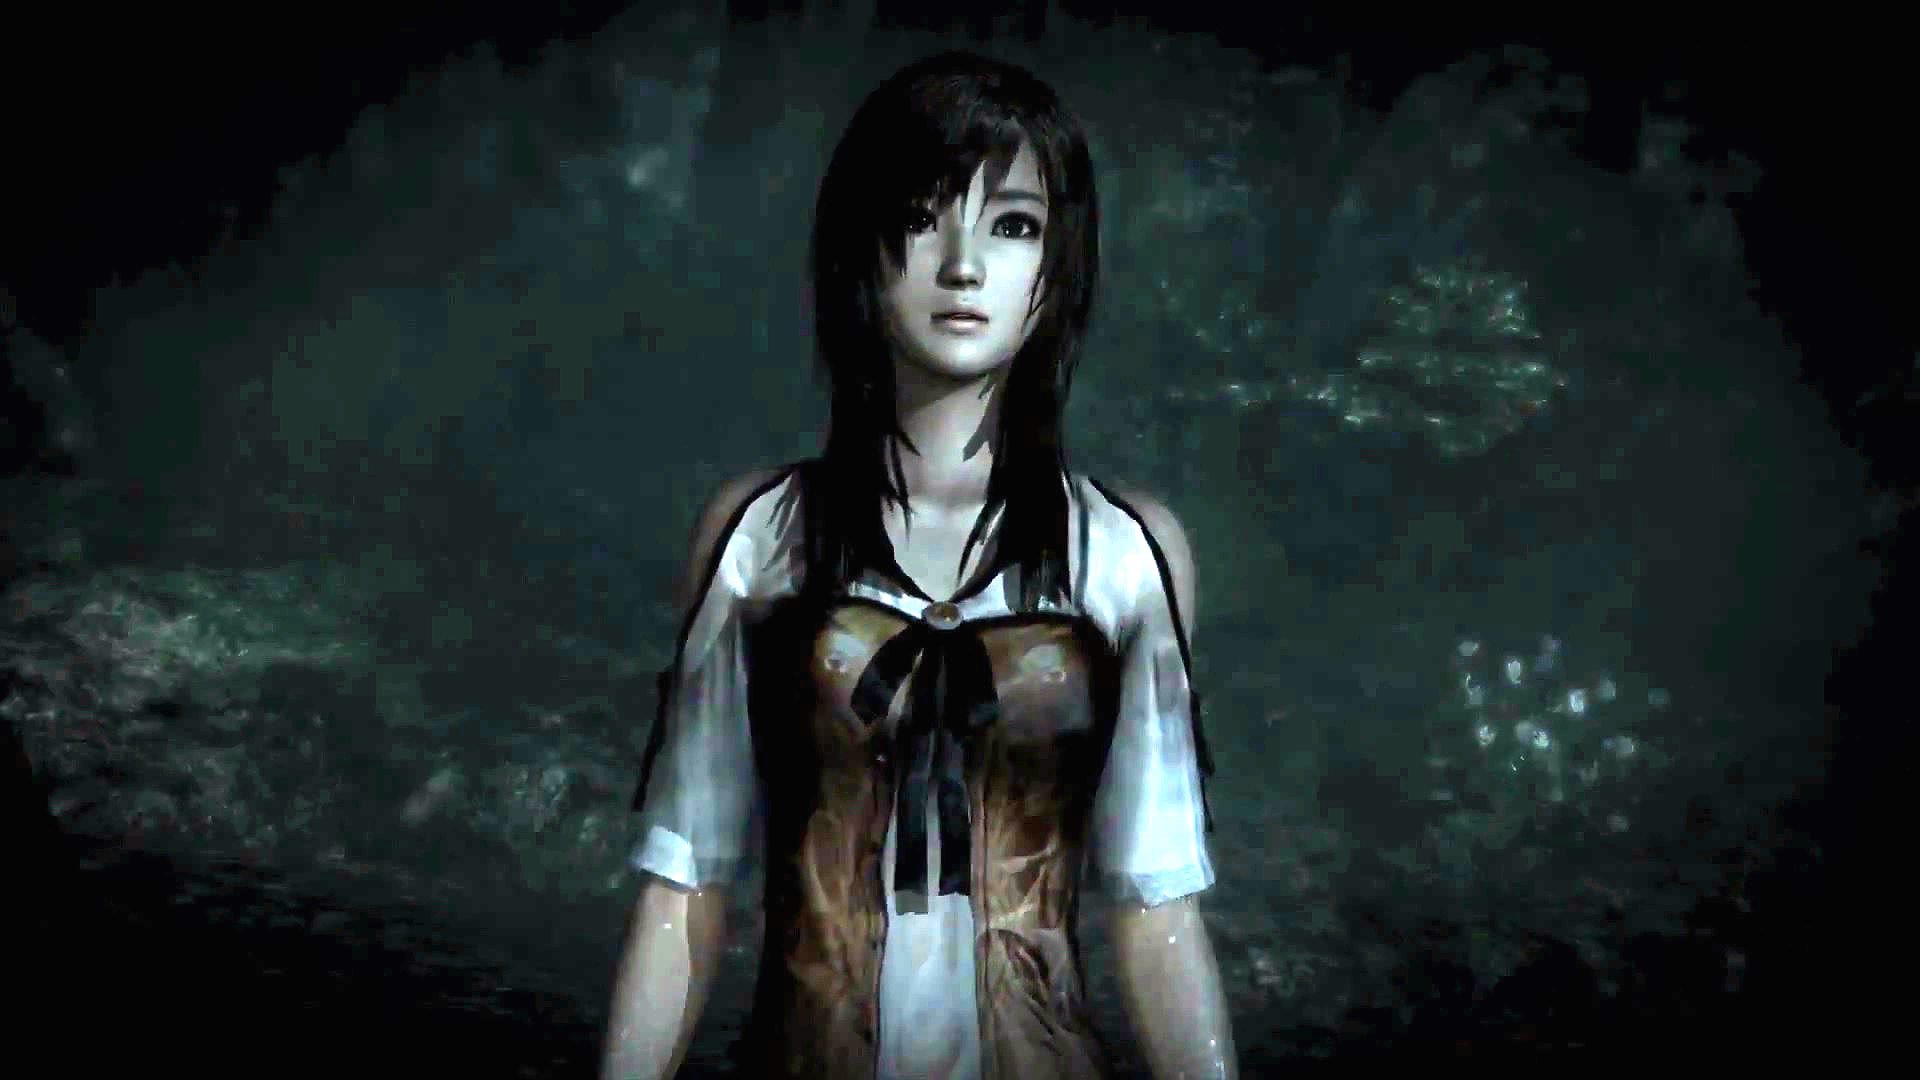 download fatal frame project zero pc for free